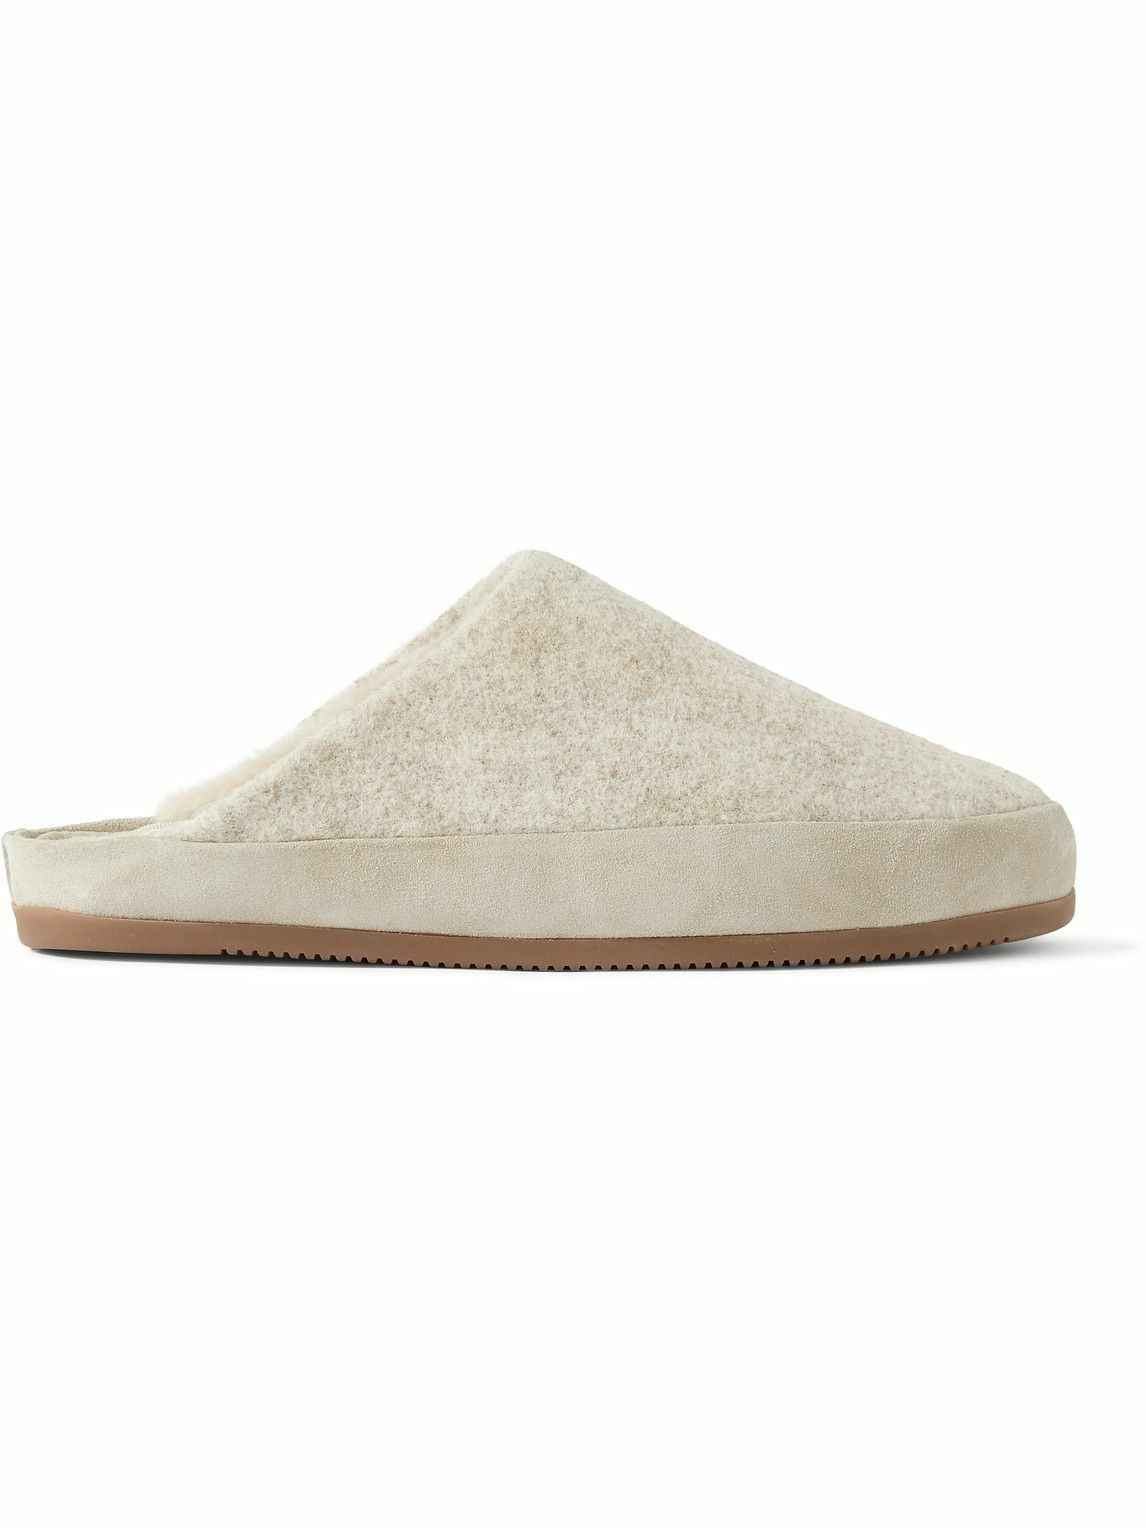 Photo: Mulo - Suede-Trimmed Shearling-Lined Recycled Wool Slippers - White